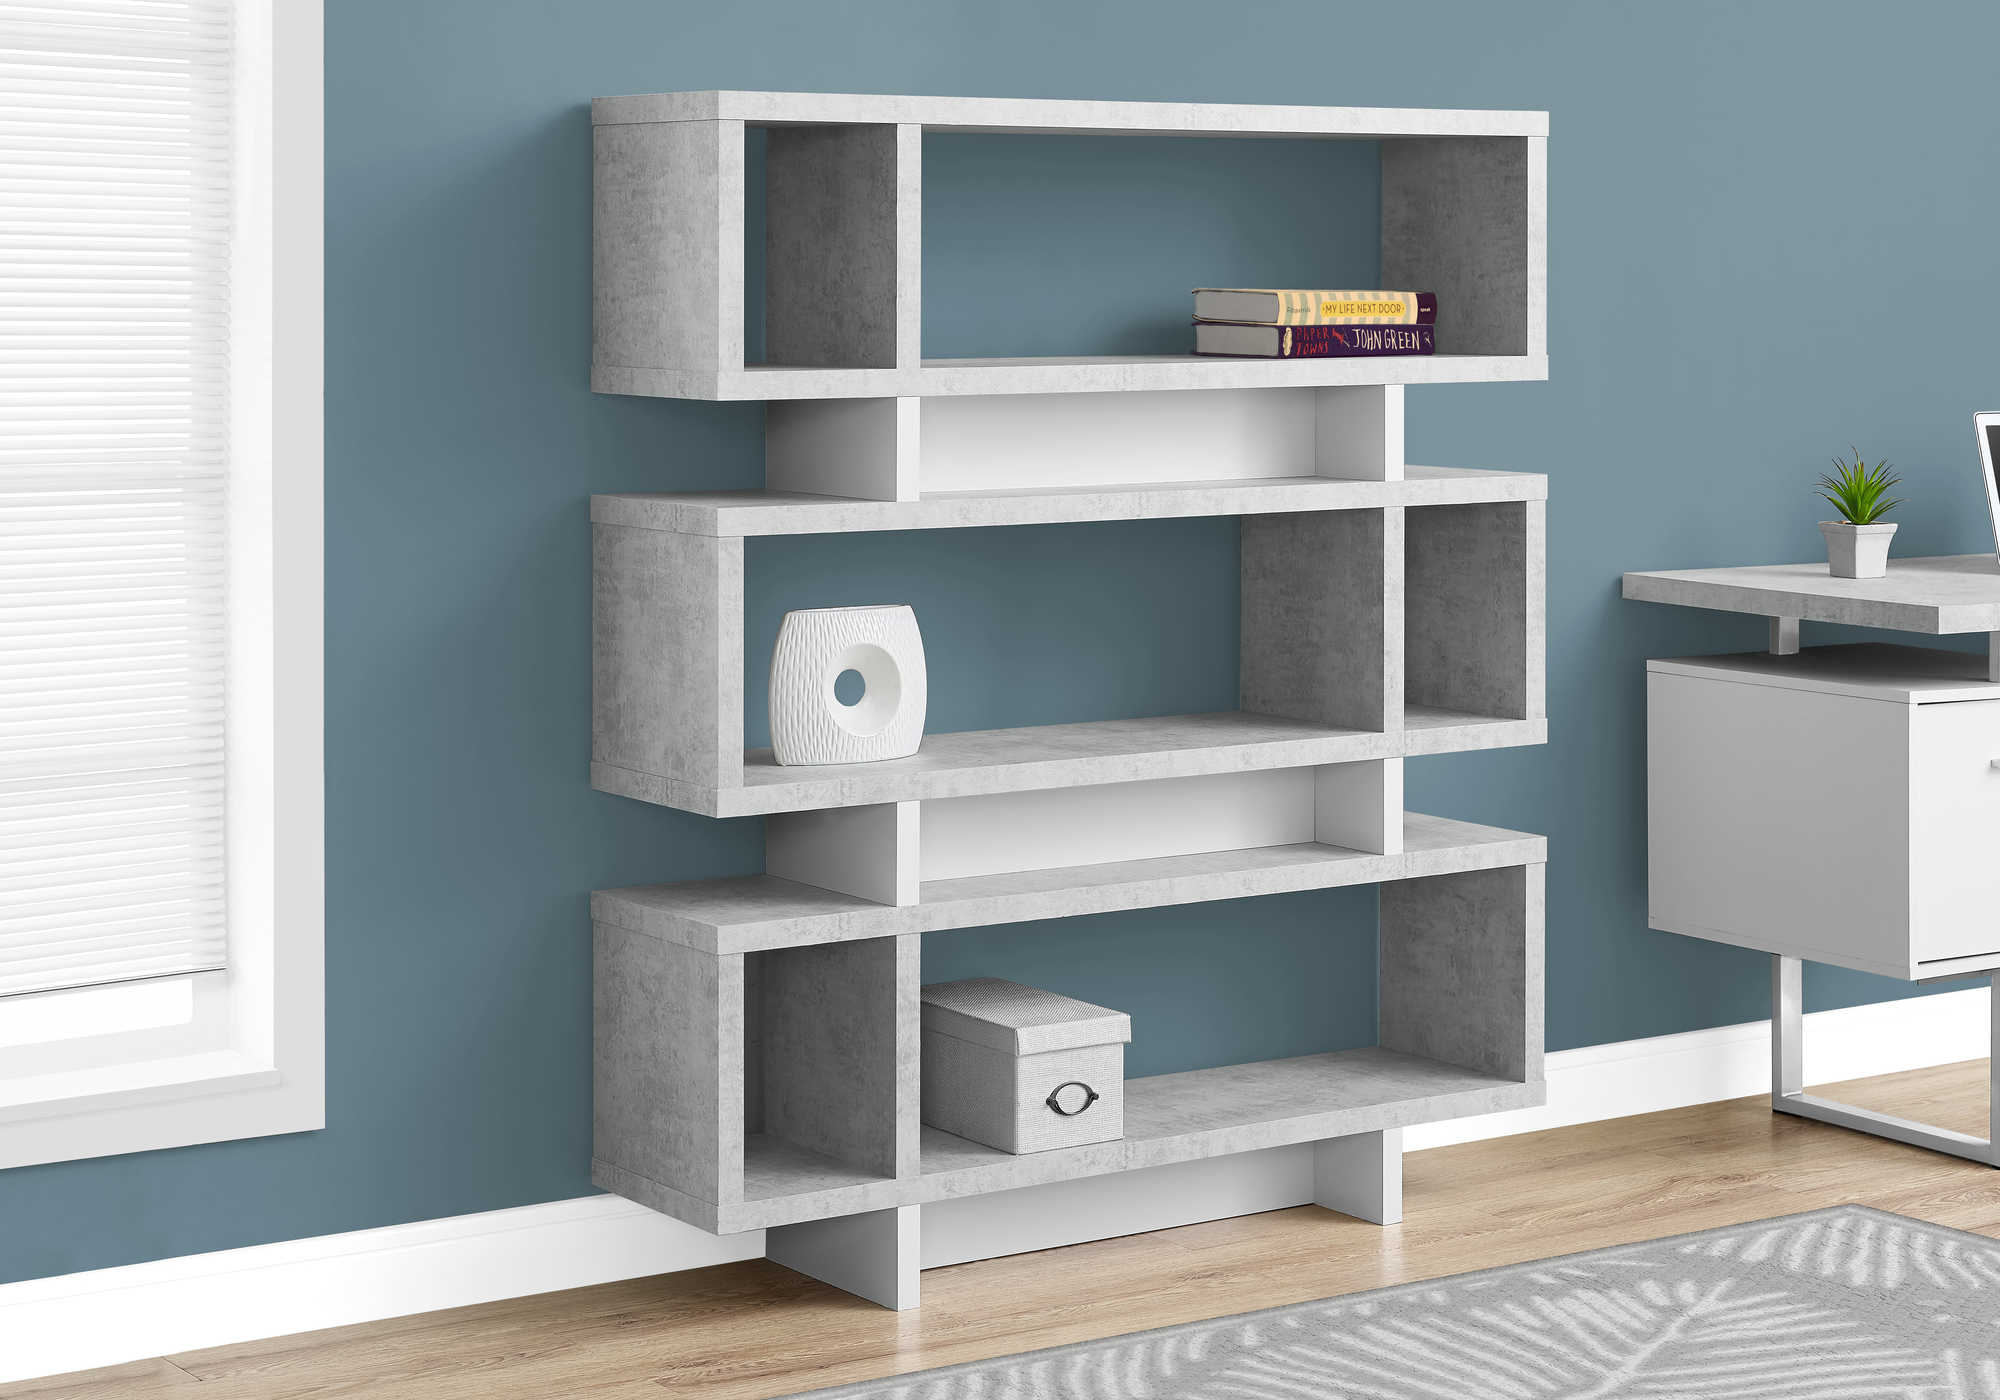 BOOKCASE - 55"H / WHITE / CEMENT-LOOK MODERN STYLE